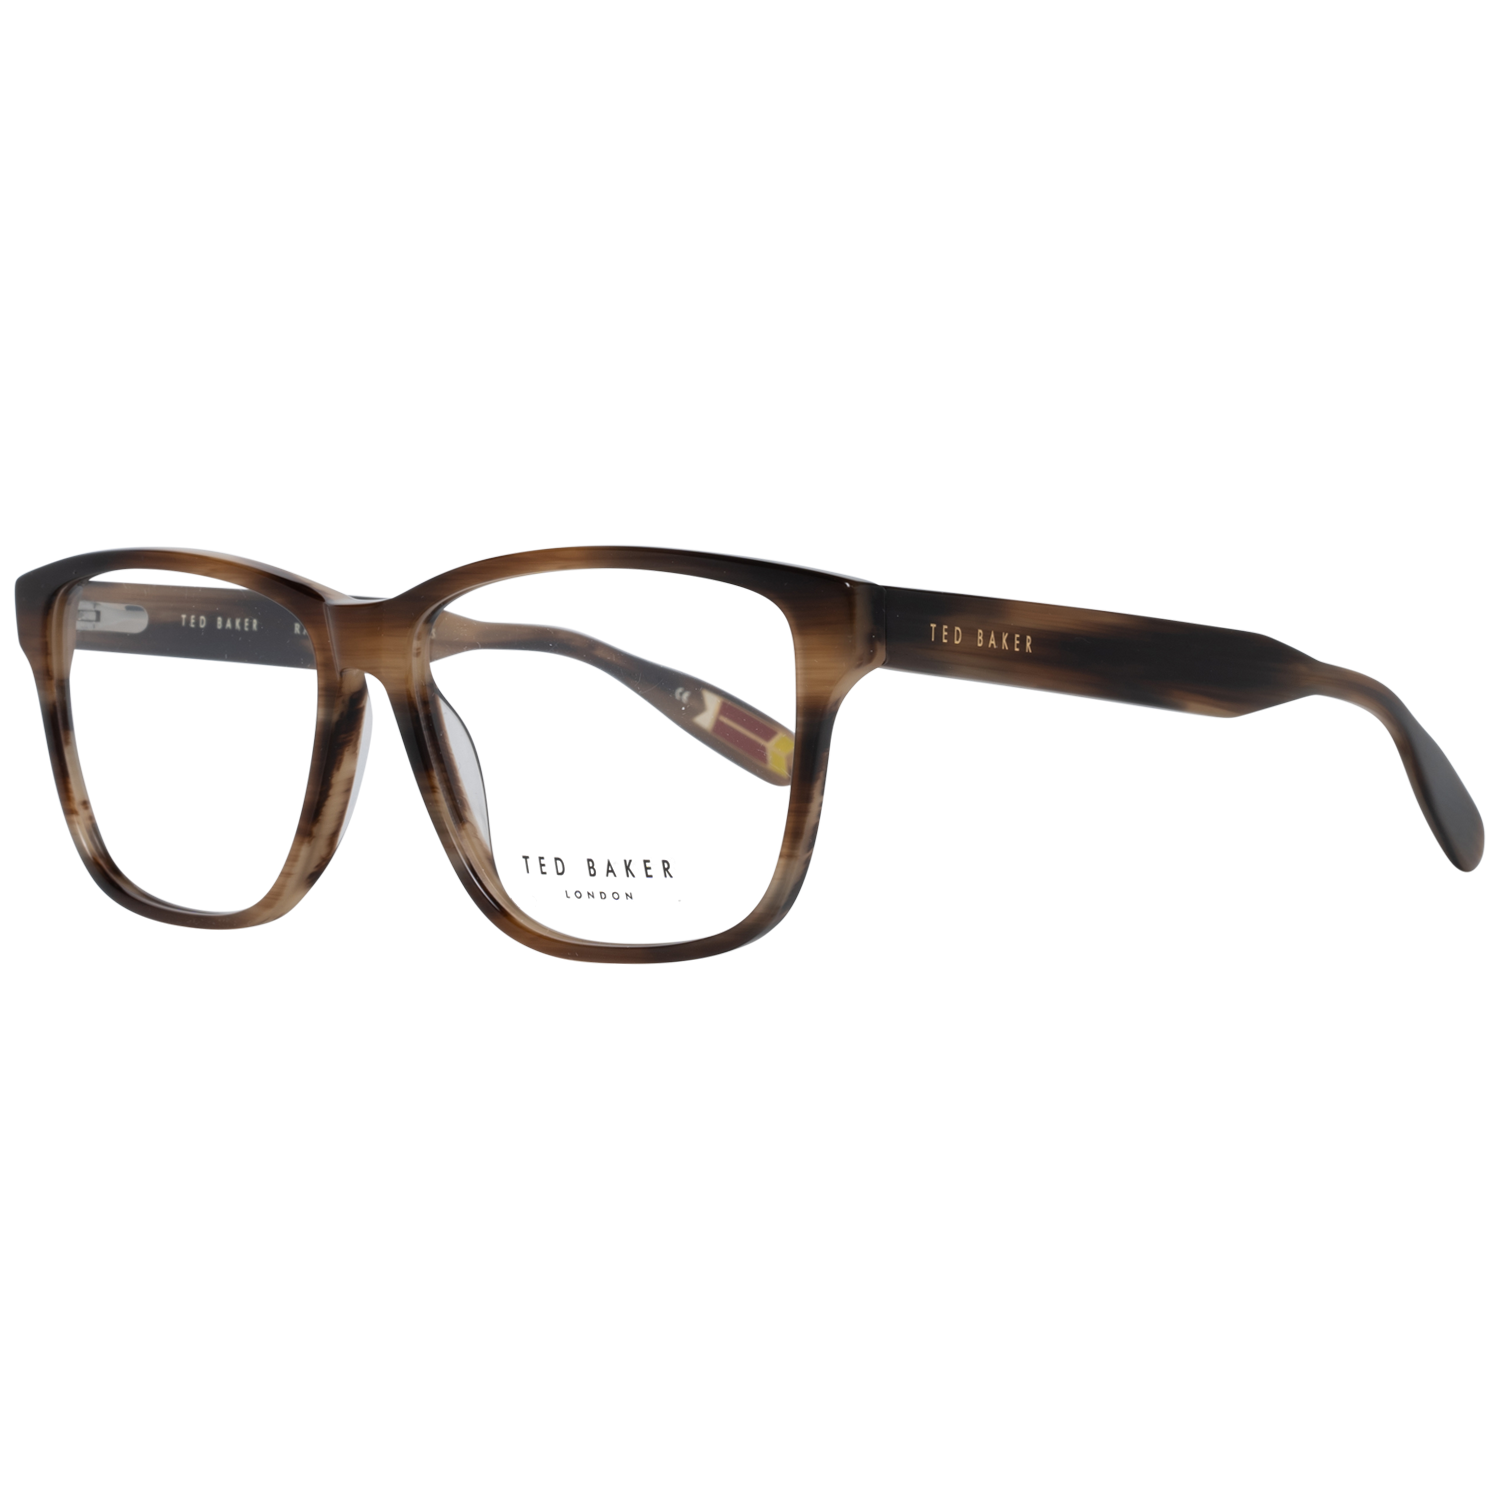 GenderMenMain colorBrownFrame colorBrownFrame materialPlasticSize56-14-145Lenses width56mmLenses heigth43mmBridge length14mmFrame width134mmTemple length145mmShipment includesCase, Cleaning clothStyleFull-RimSpring hingeYes